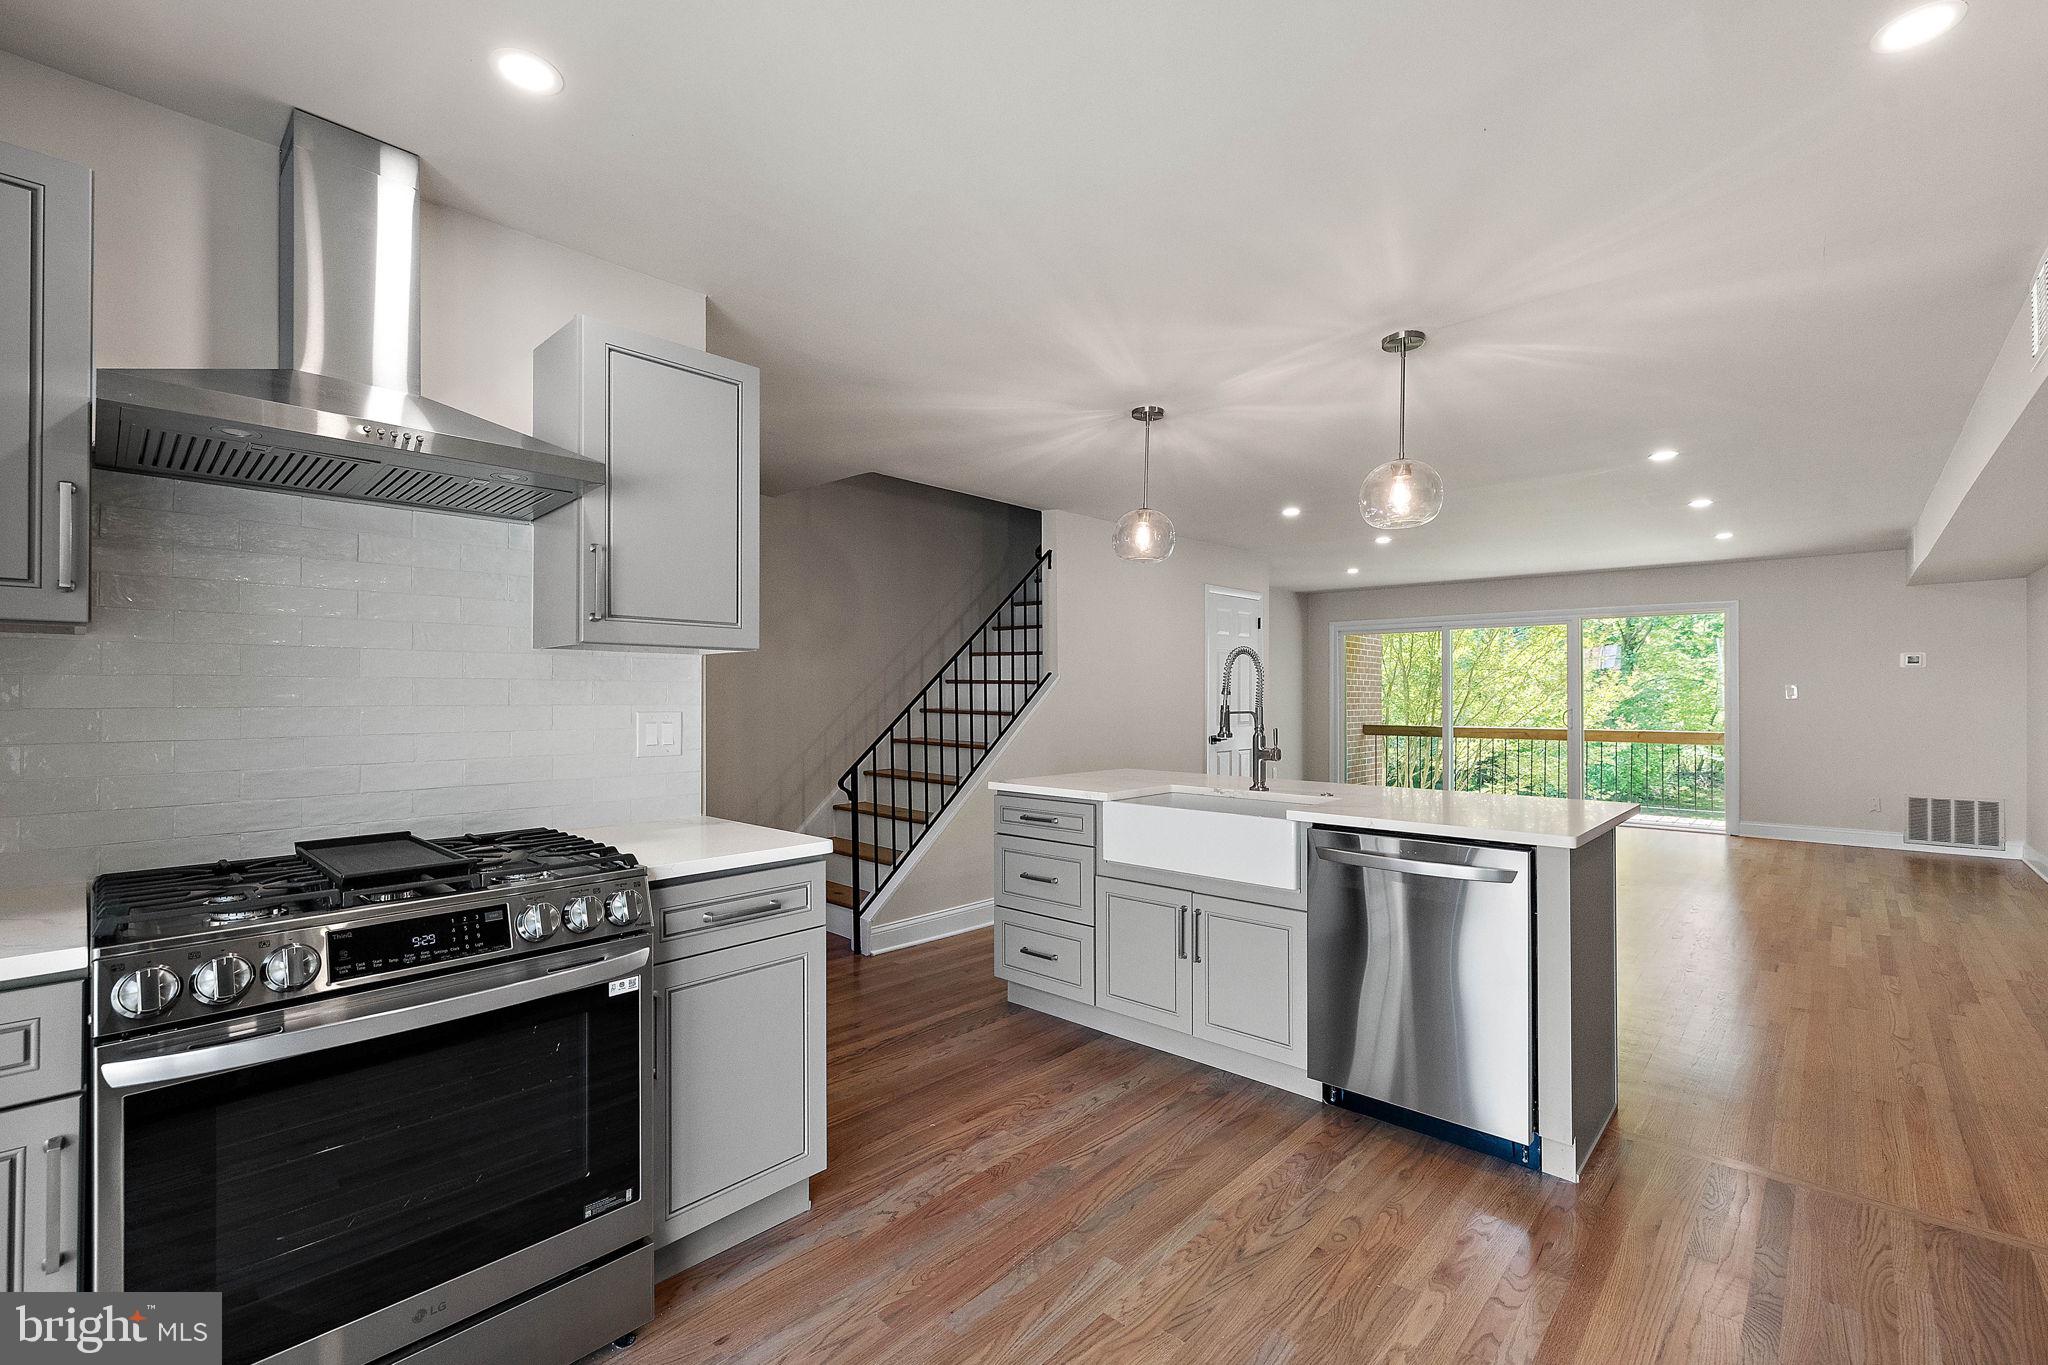 a kitchen with stainless steel appliances a stove a sink and wooden floors